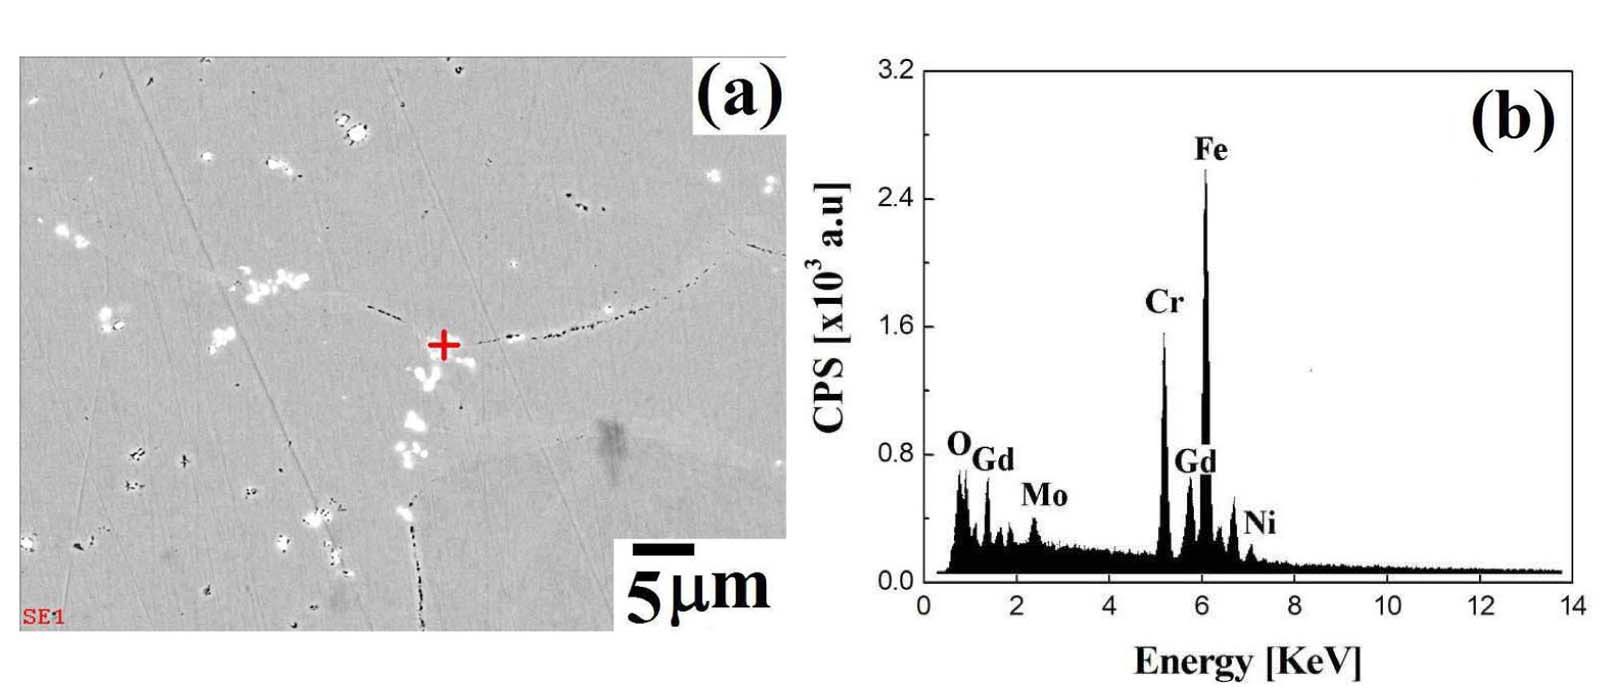 SEM Image and EDX Spectra of the Precipitates at the Grain Boundary of as-cast Specimen.